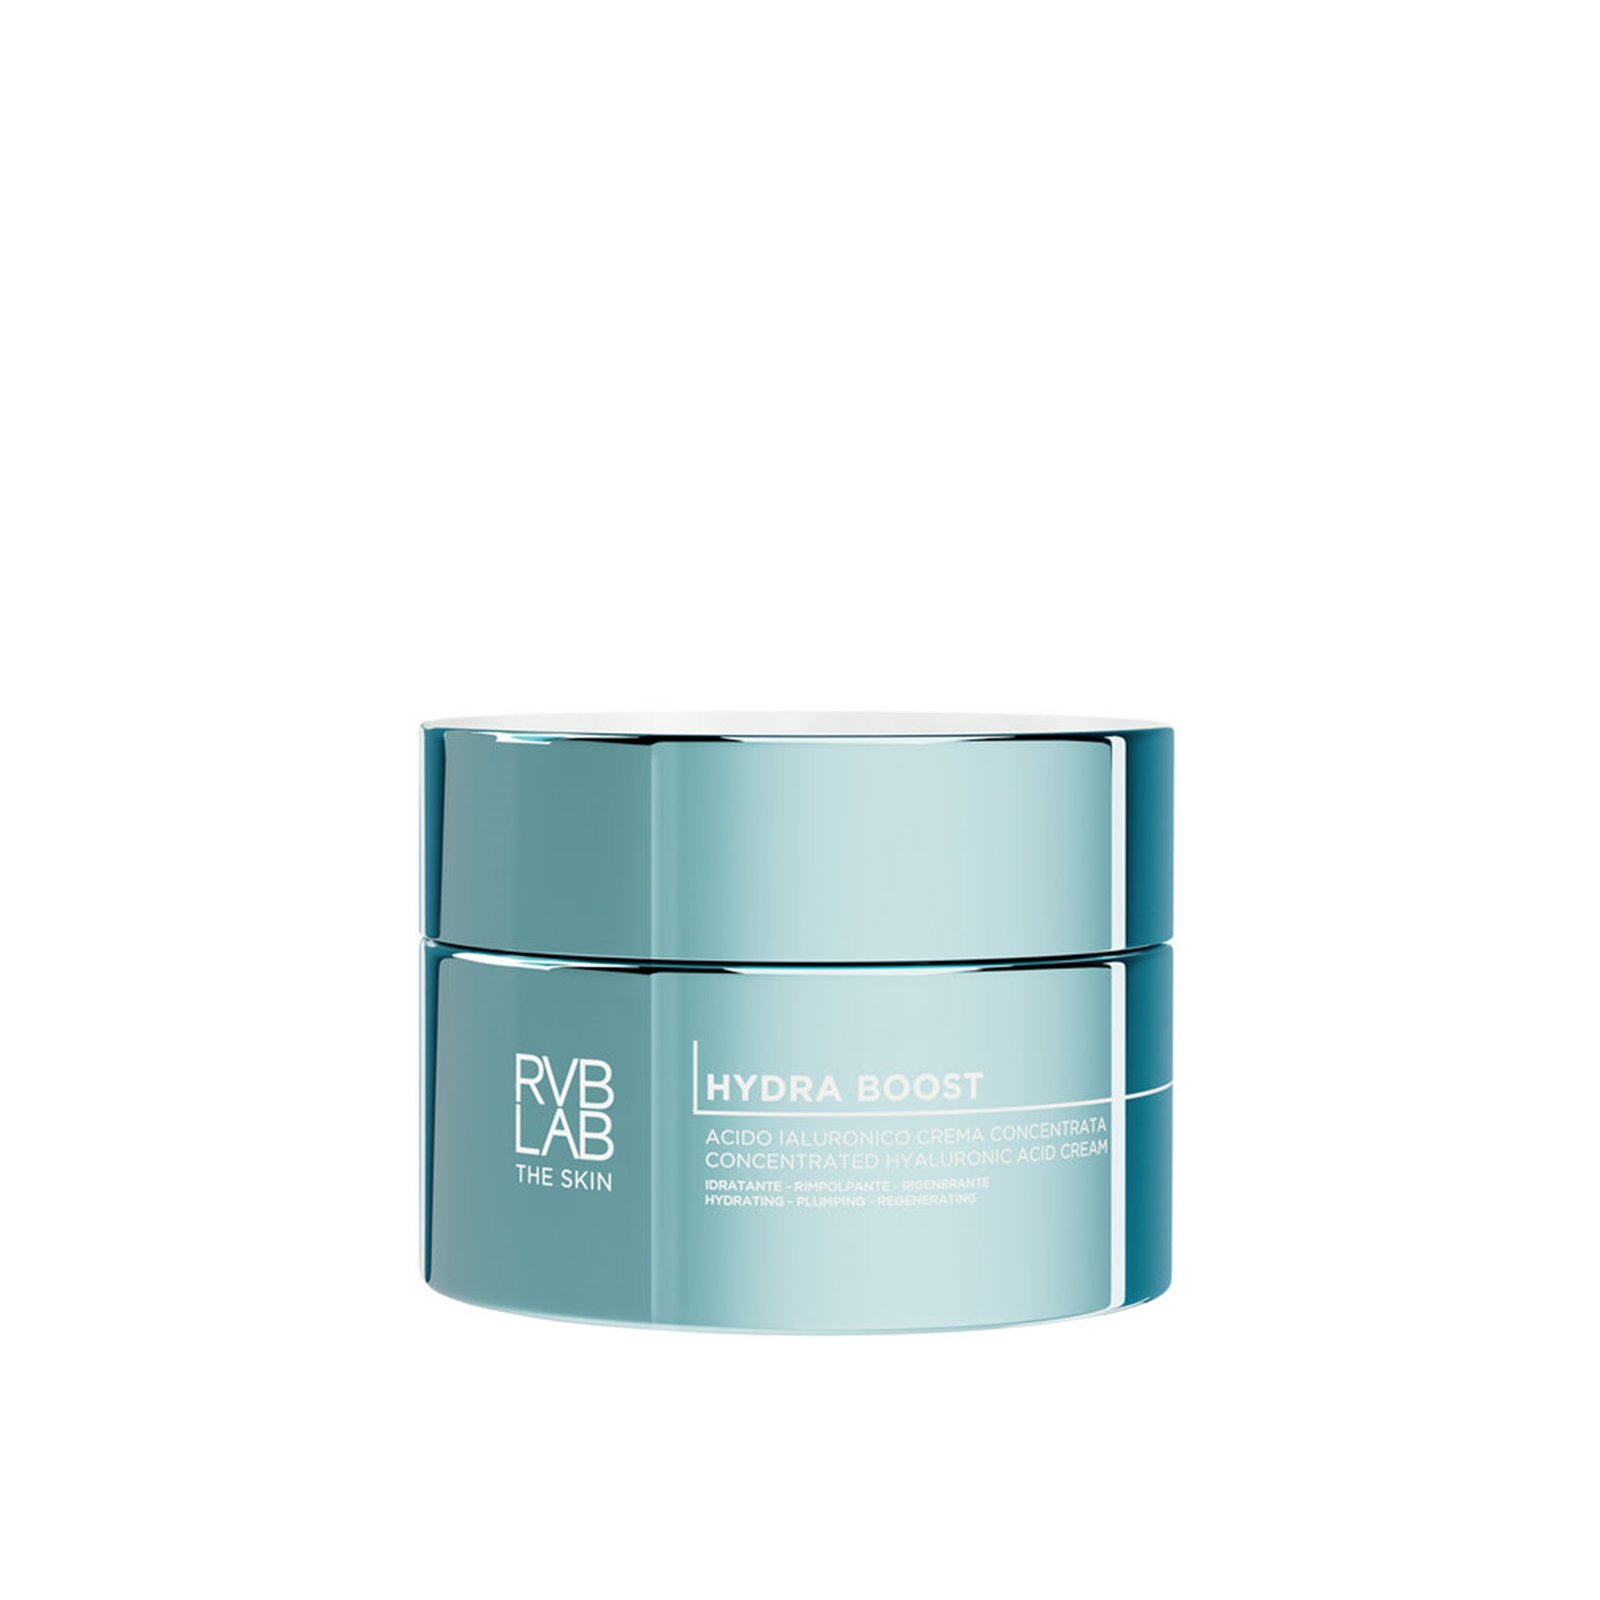 RVB Lab Hydra Boost Concentrated Hyaluronic Acid Cream 50ml (1.7floz)